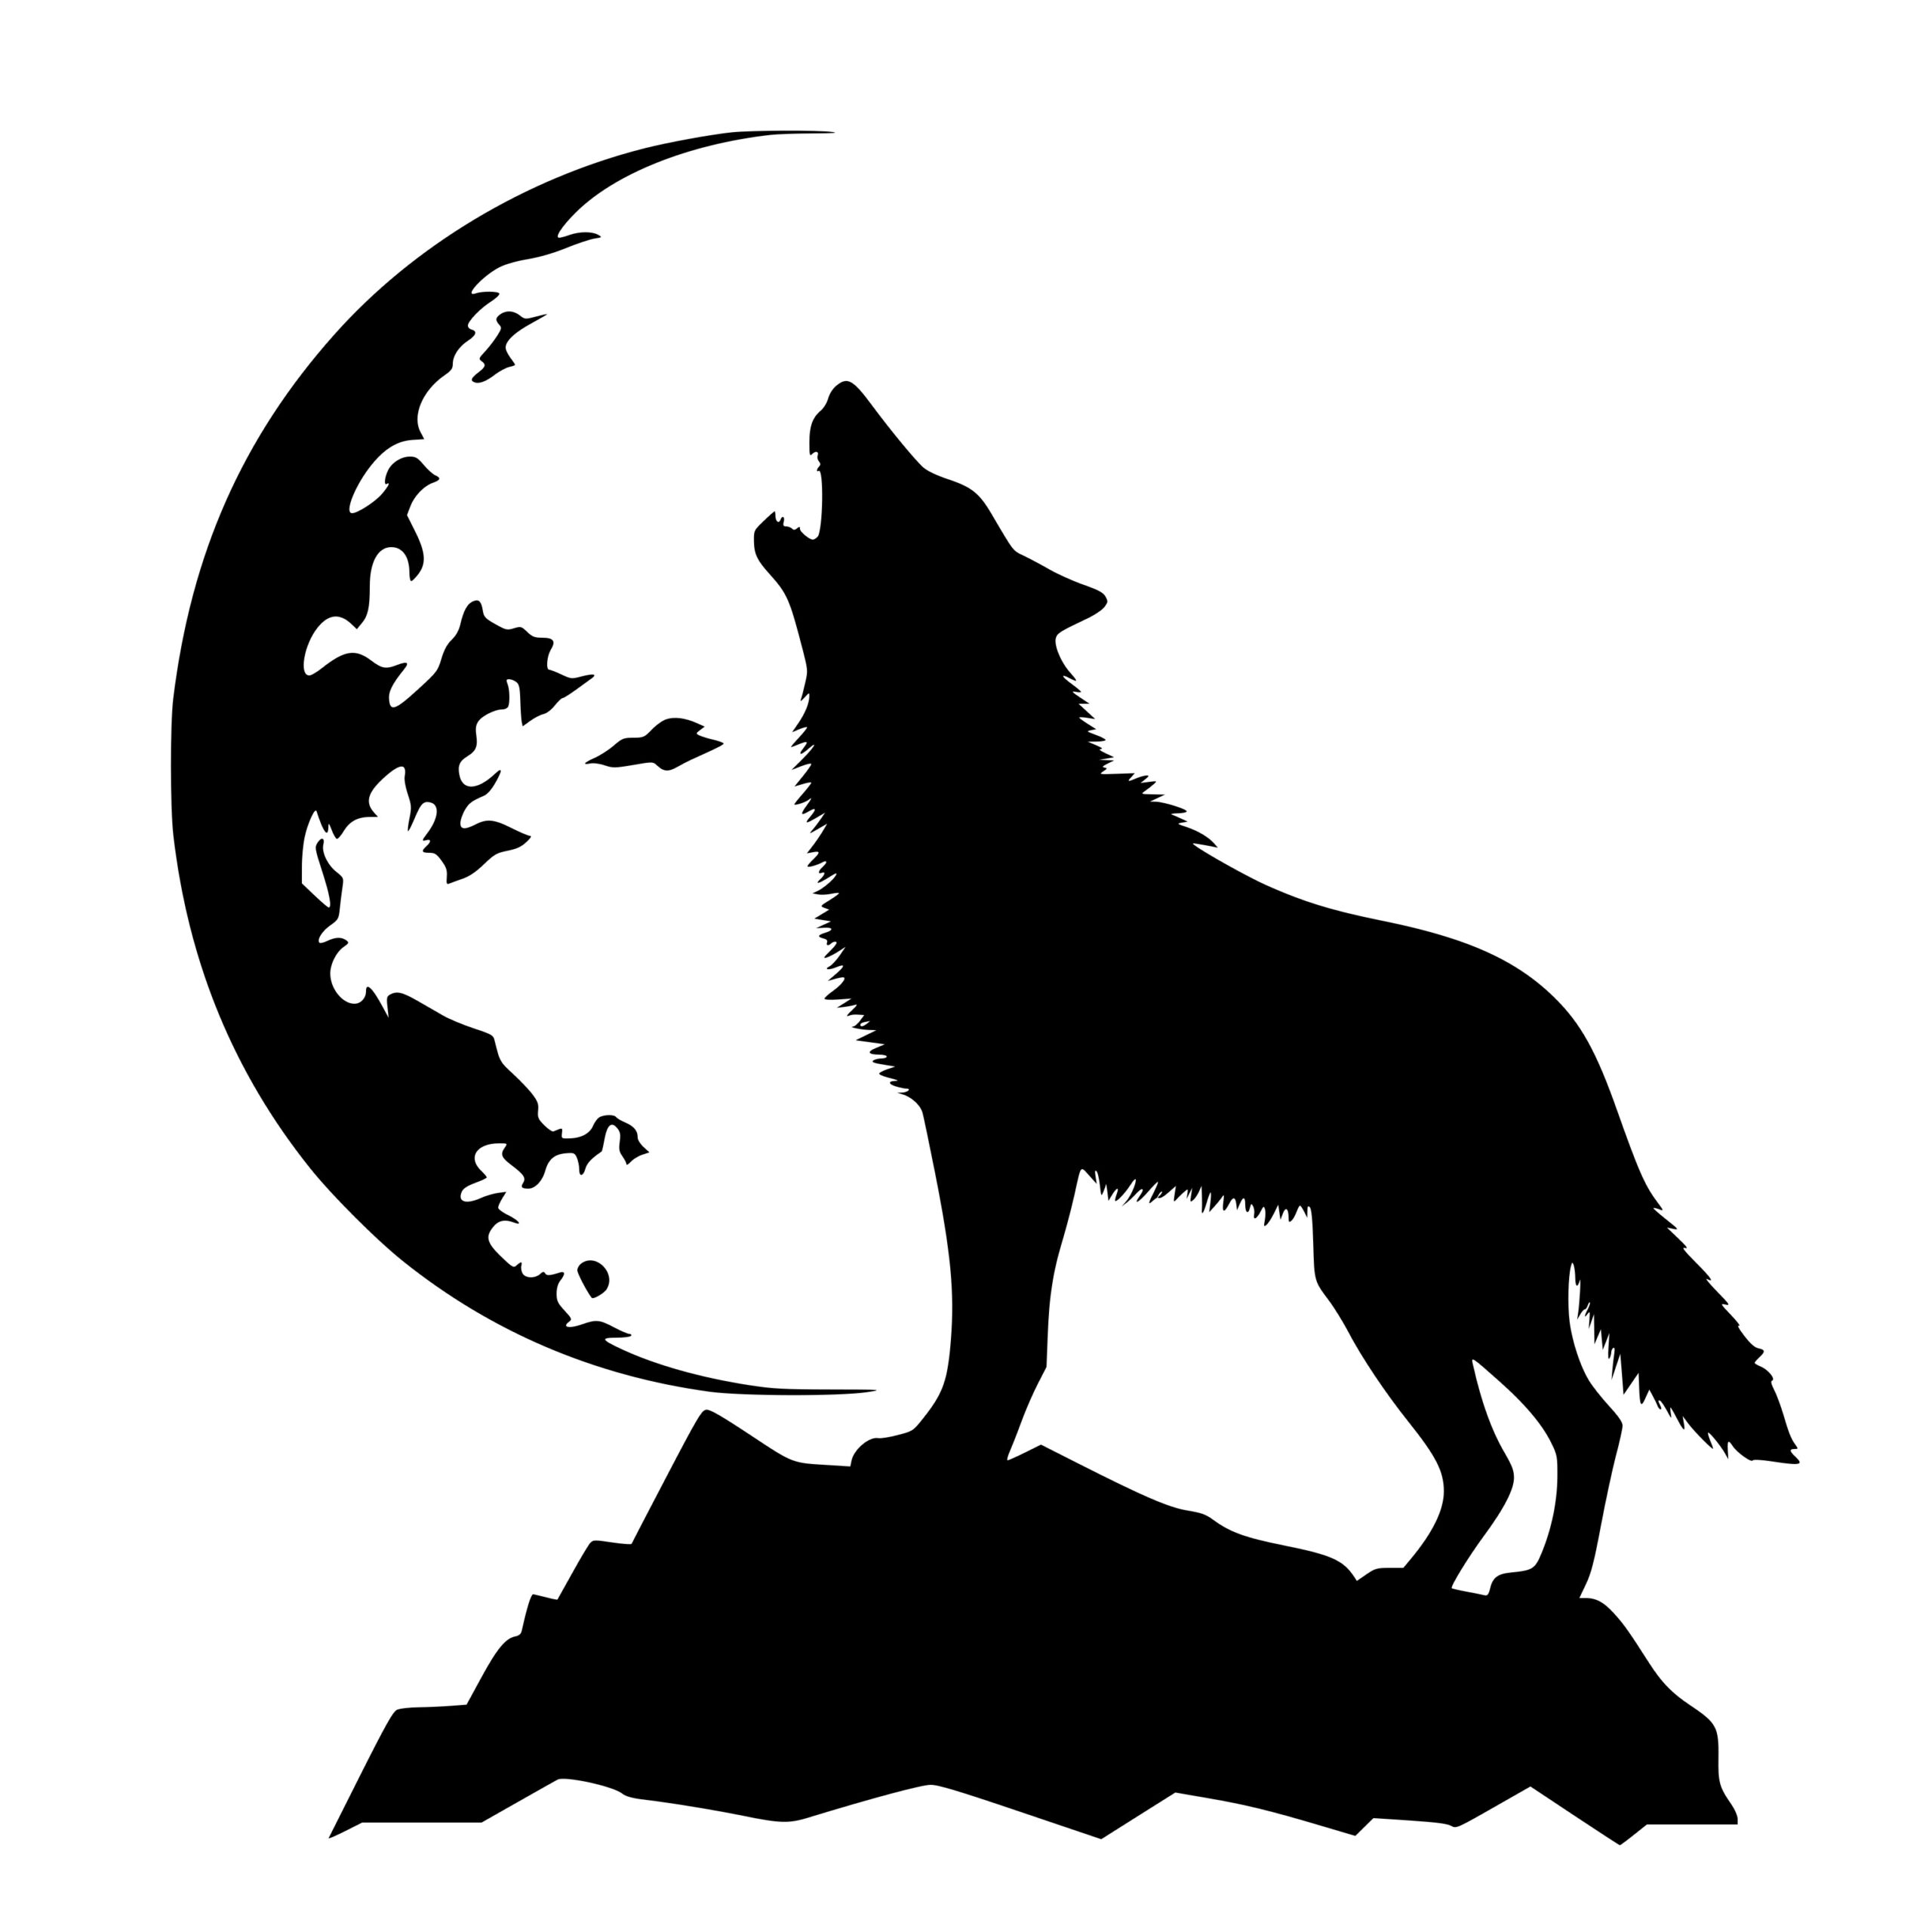 Nighttime Wolf Howl SVG File for Cricut, Silhouette, Laser Machines